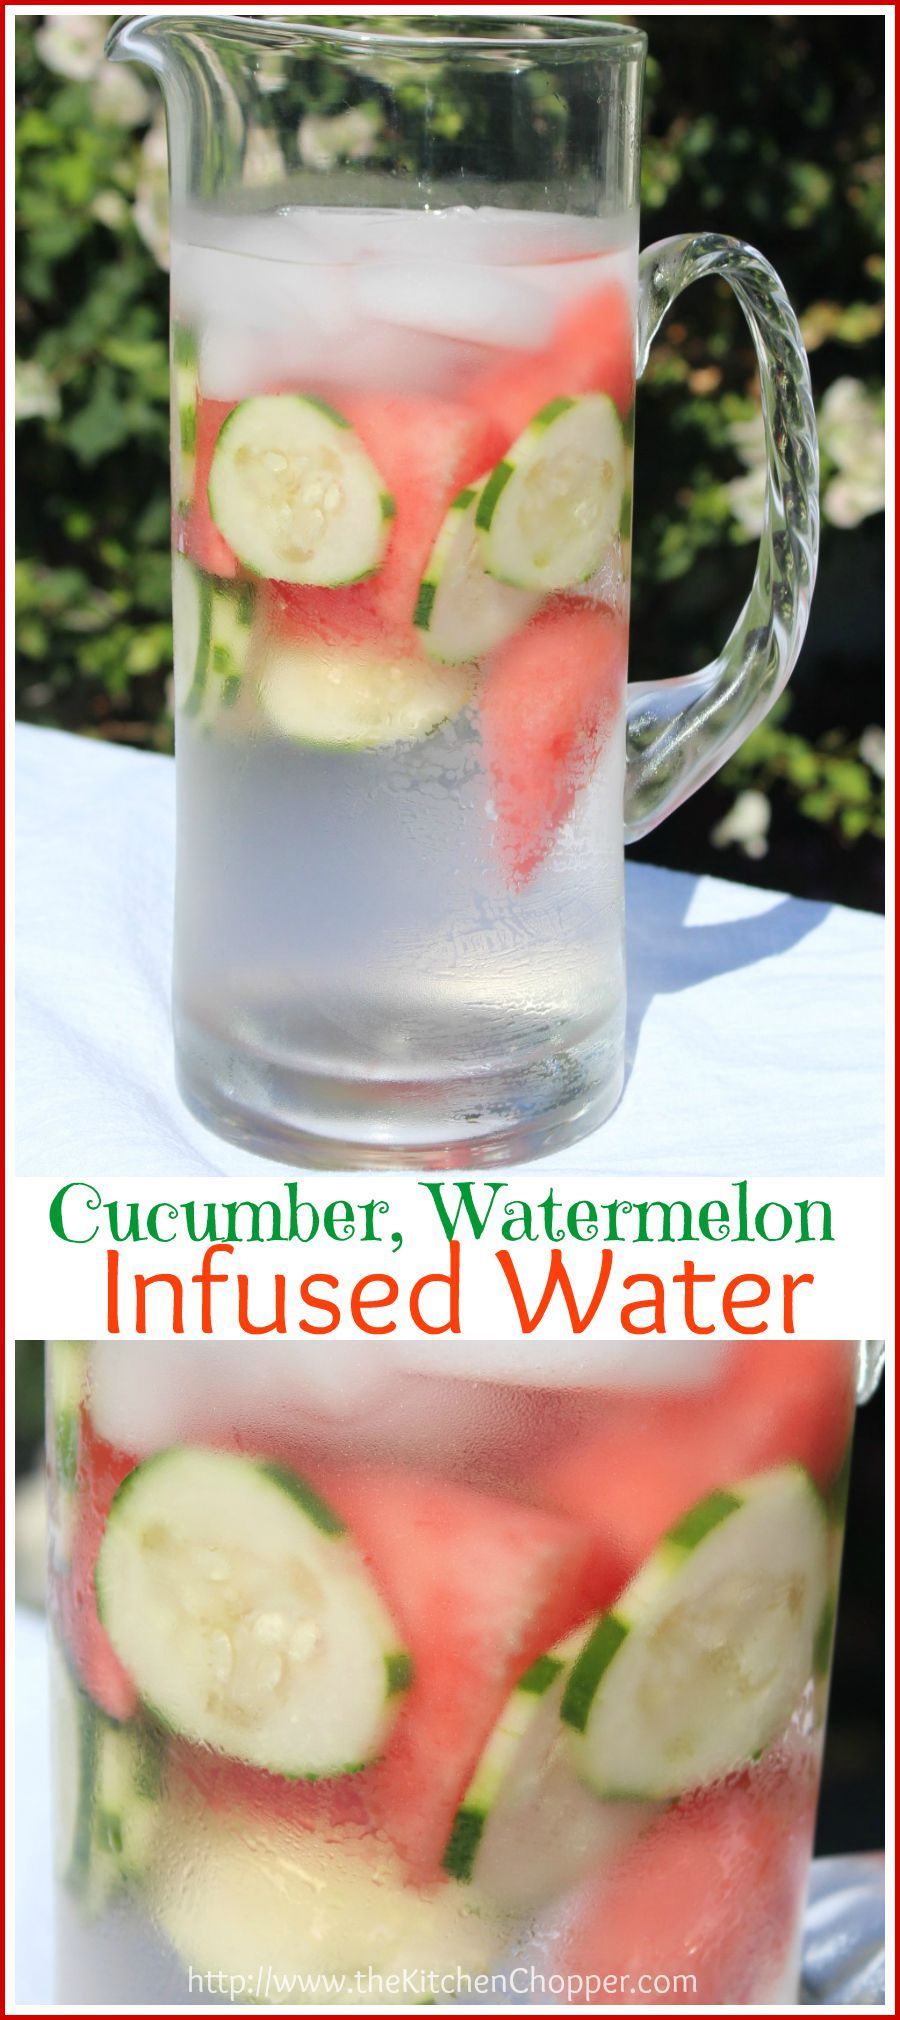 Cucumber, Watermelon Infused Water The Kitchen Chopper